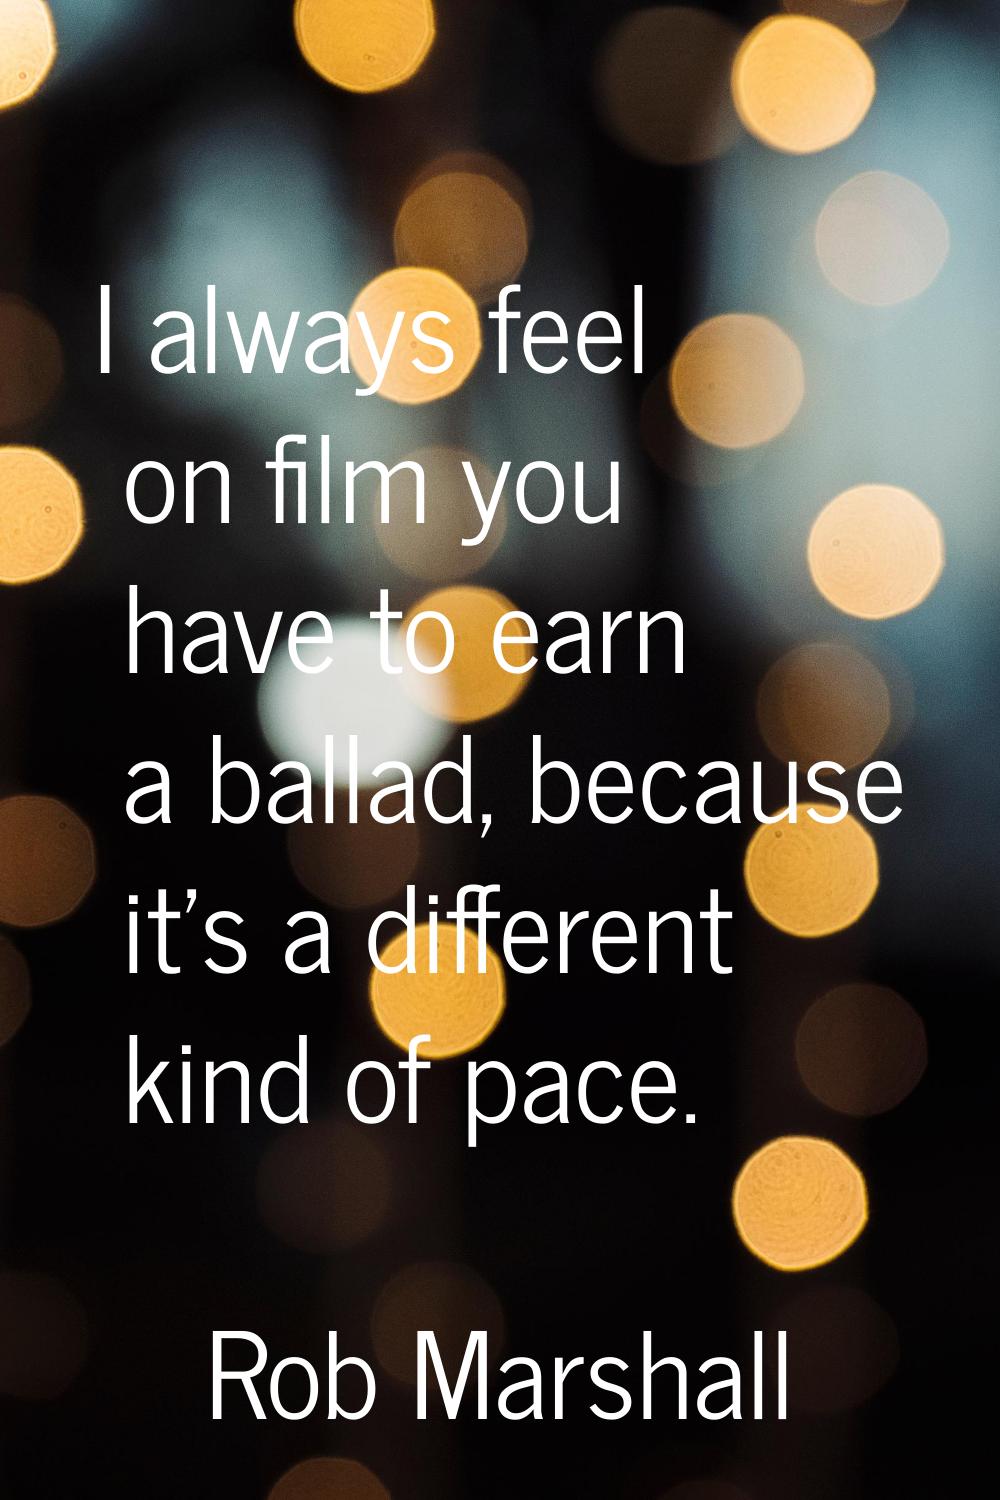 I always feel on film you have to earn a ballad, because it's a different kind of pace.